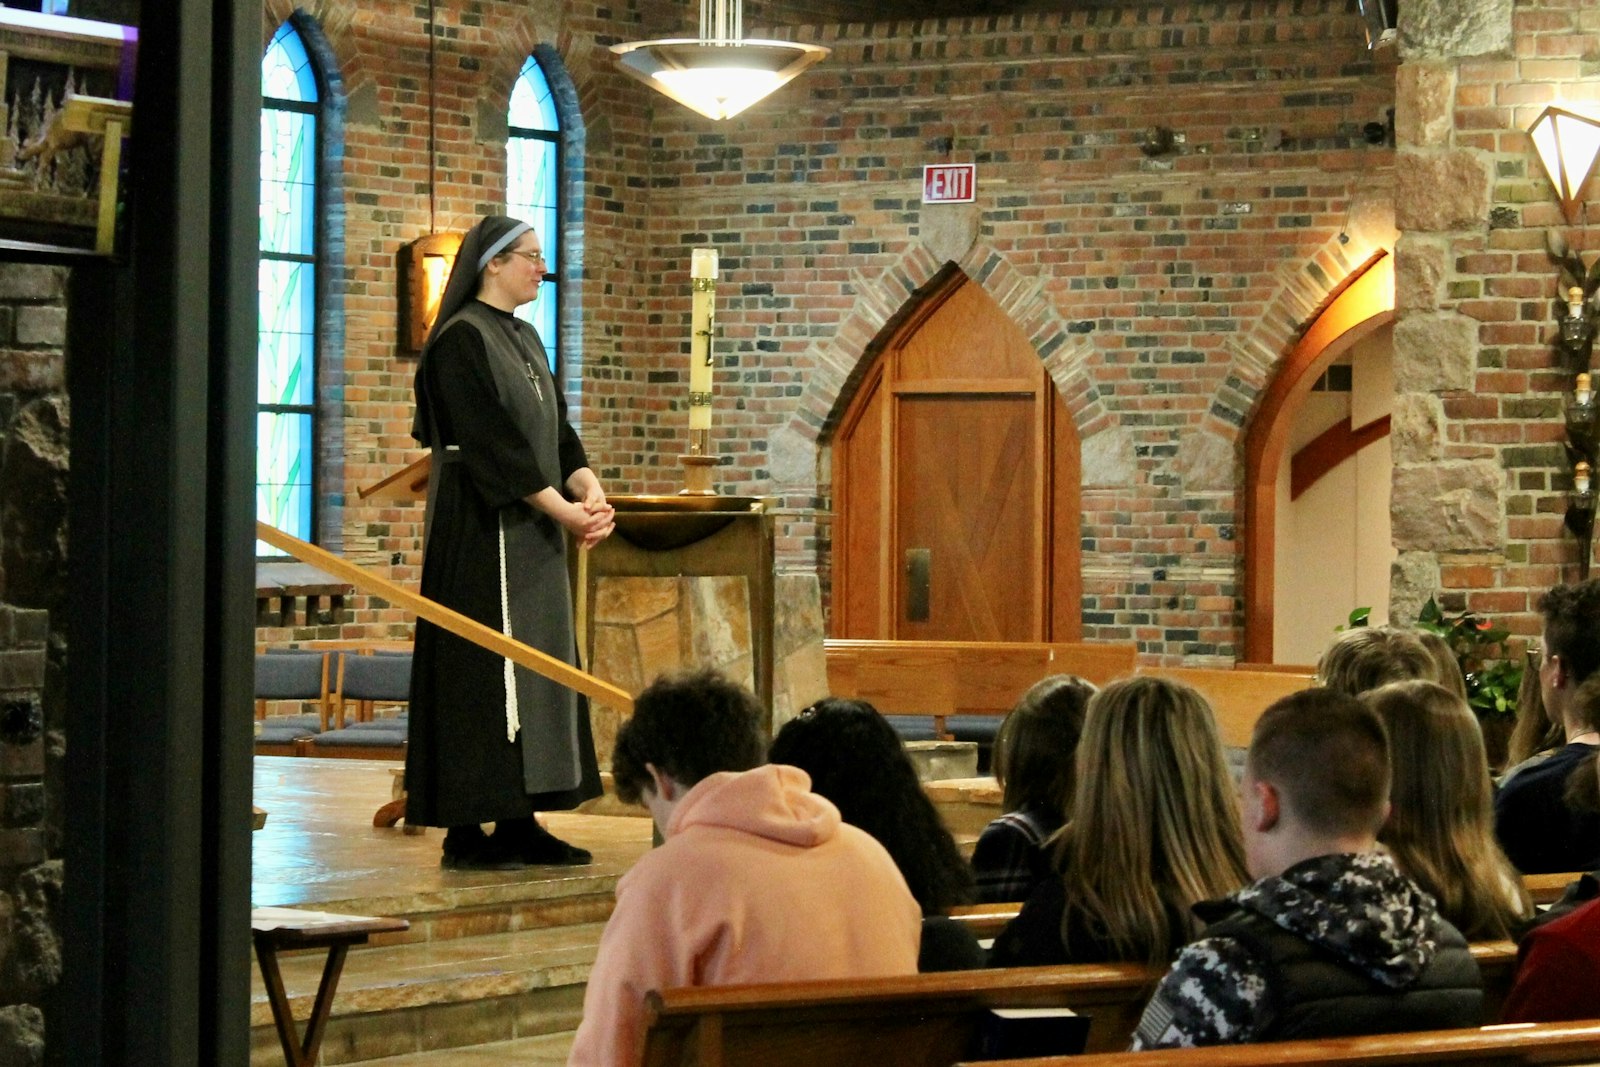 Sr. Mary Gianna Thornby, DLJC, a survivor of the 1999 school shooting at Columbine High School in Colorado, speaks to Oxford High School students at St. Joseph Parish in Lake Orion on March 13. Sr. Mary Gianna was invited to tour Oxford High School, where prayer is "becoming a bit more normal," Johnson said. (Gabriella Patti | Detroit Catholic)